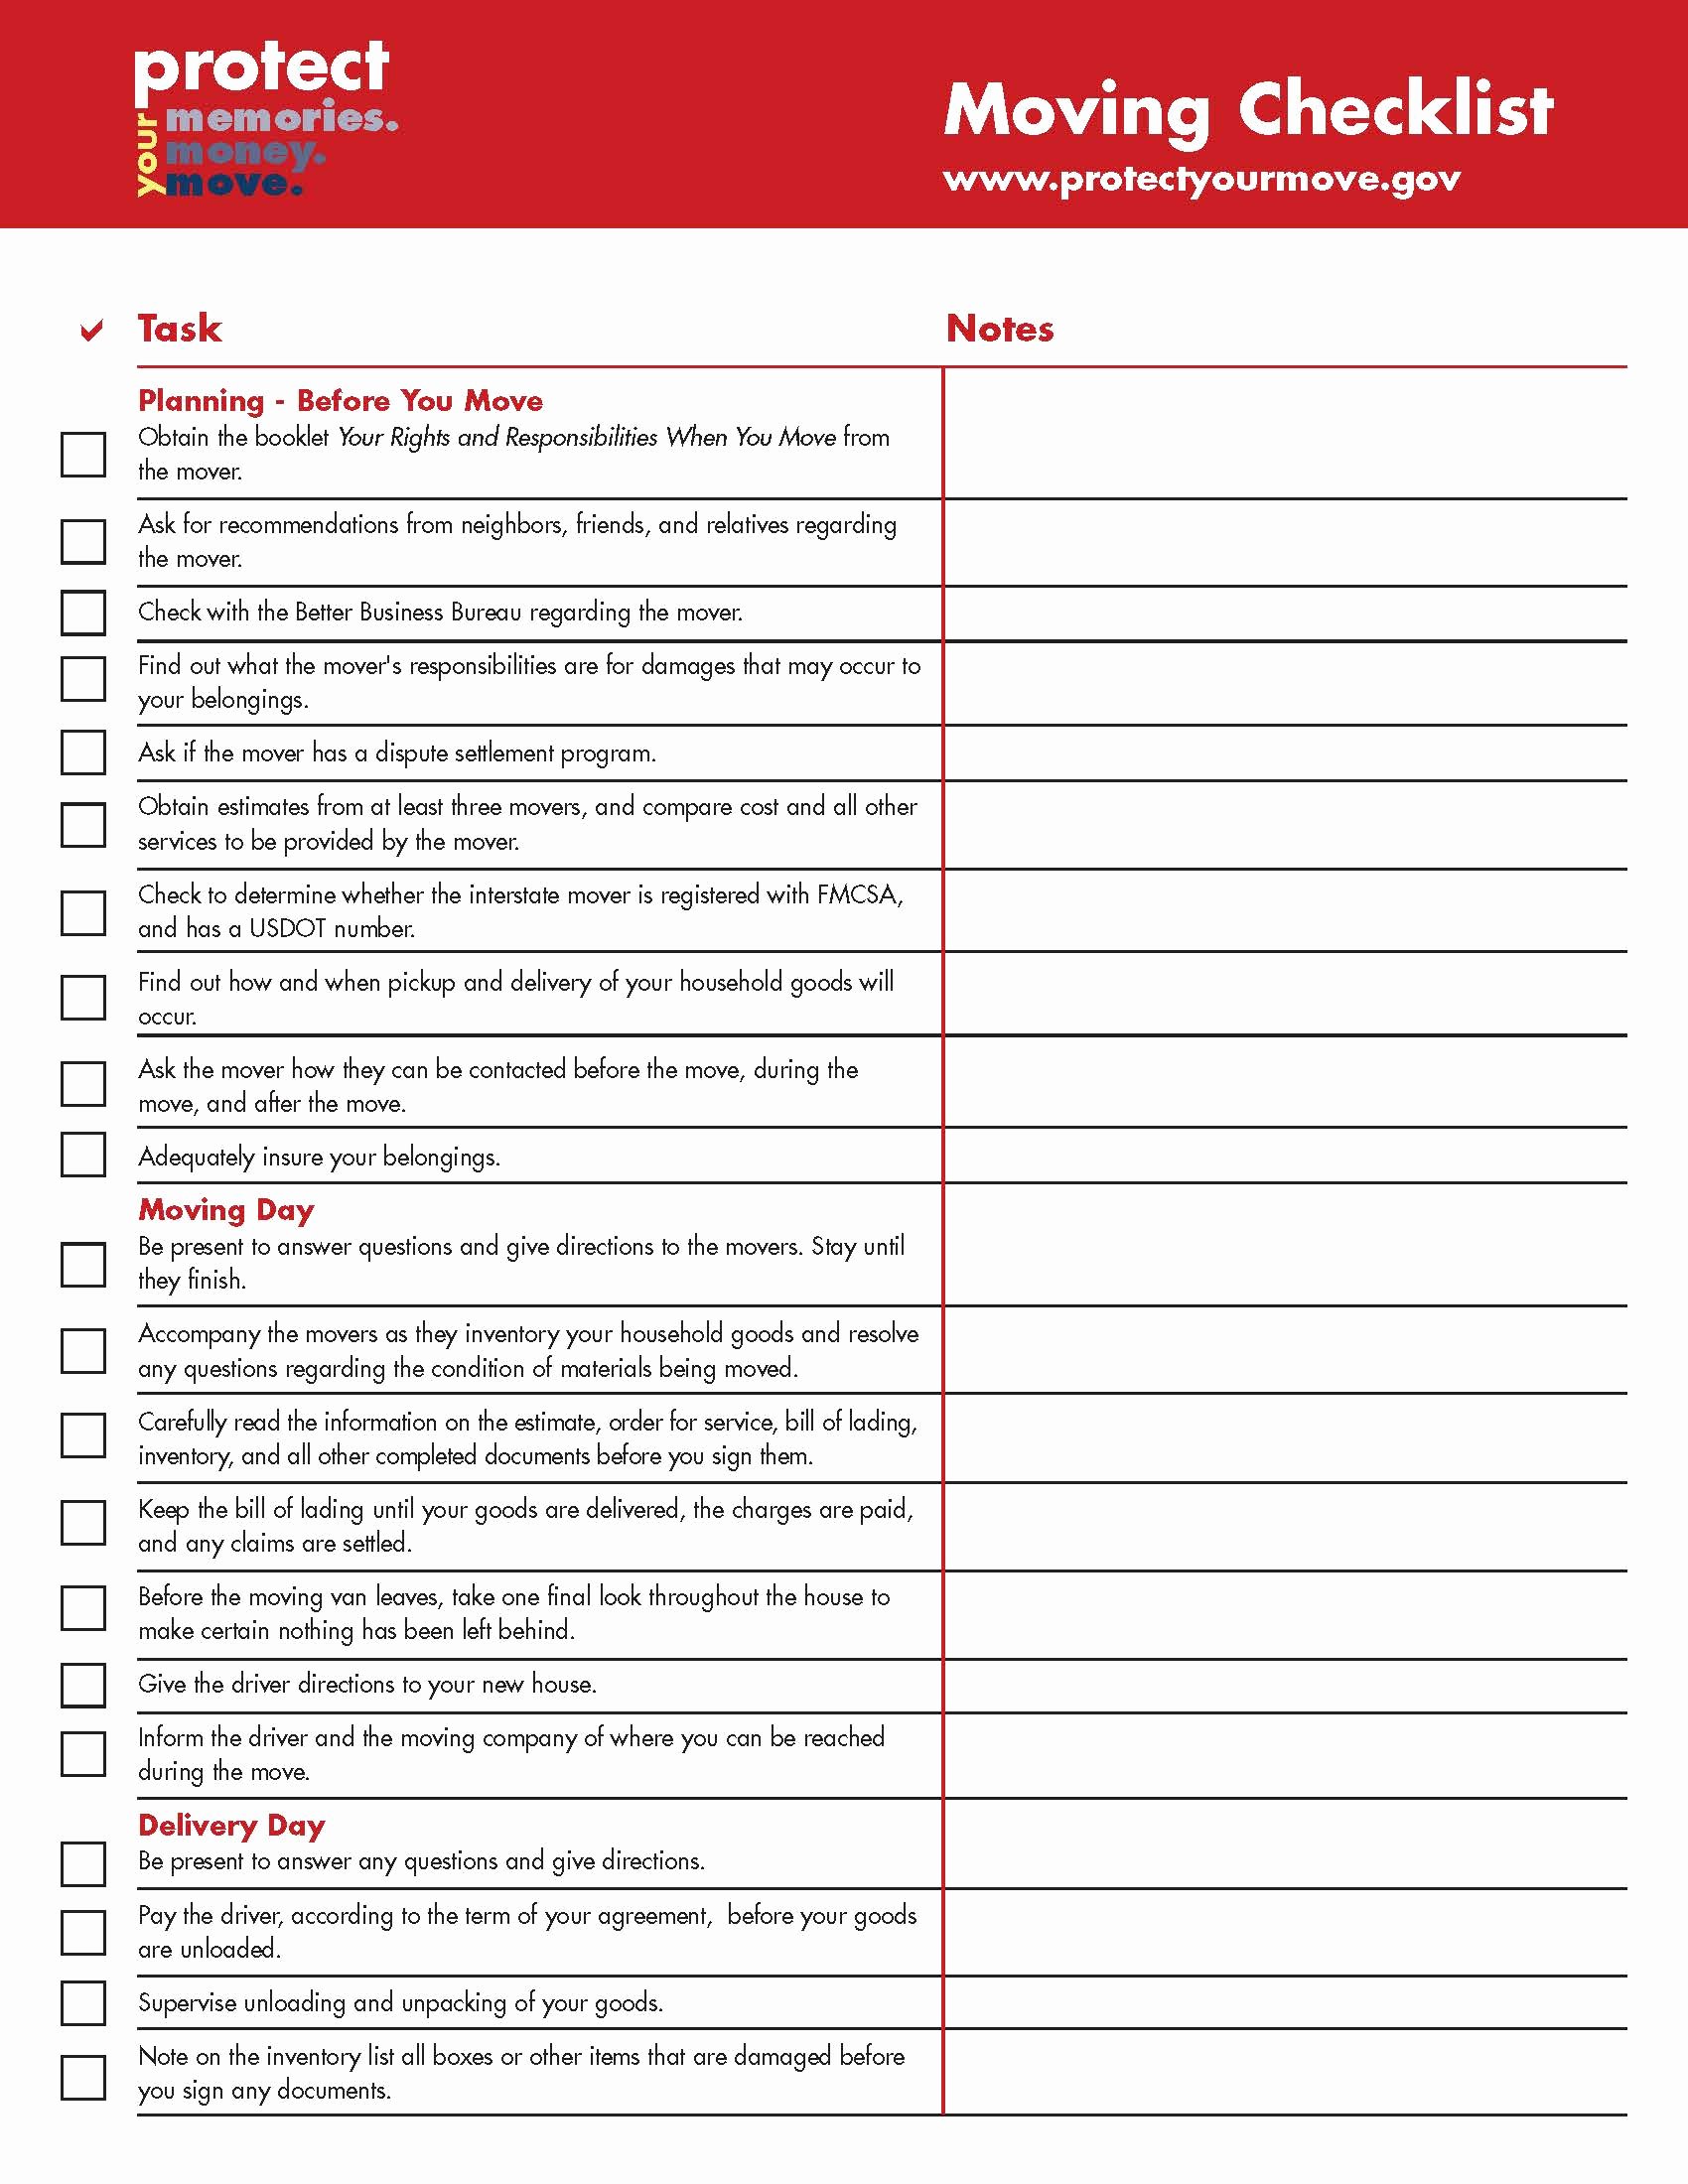 Moving Office Checklist Template Fresh Moving Checklist for Household Goods Interstate Moves